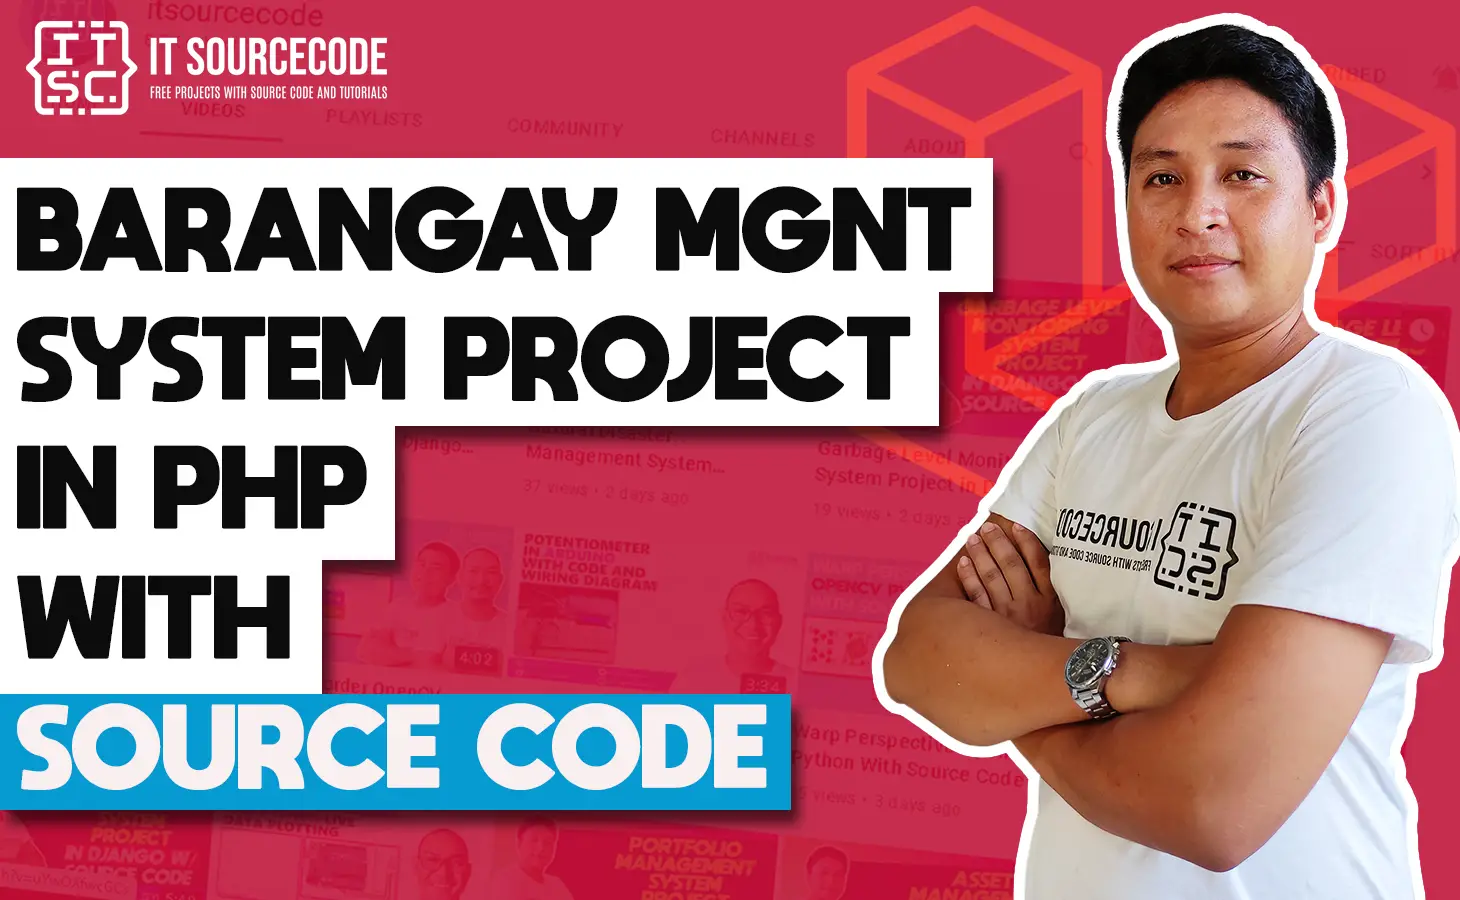 Barangay Management System Project In PHP With Source Code